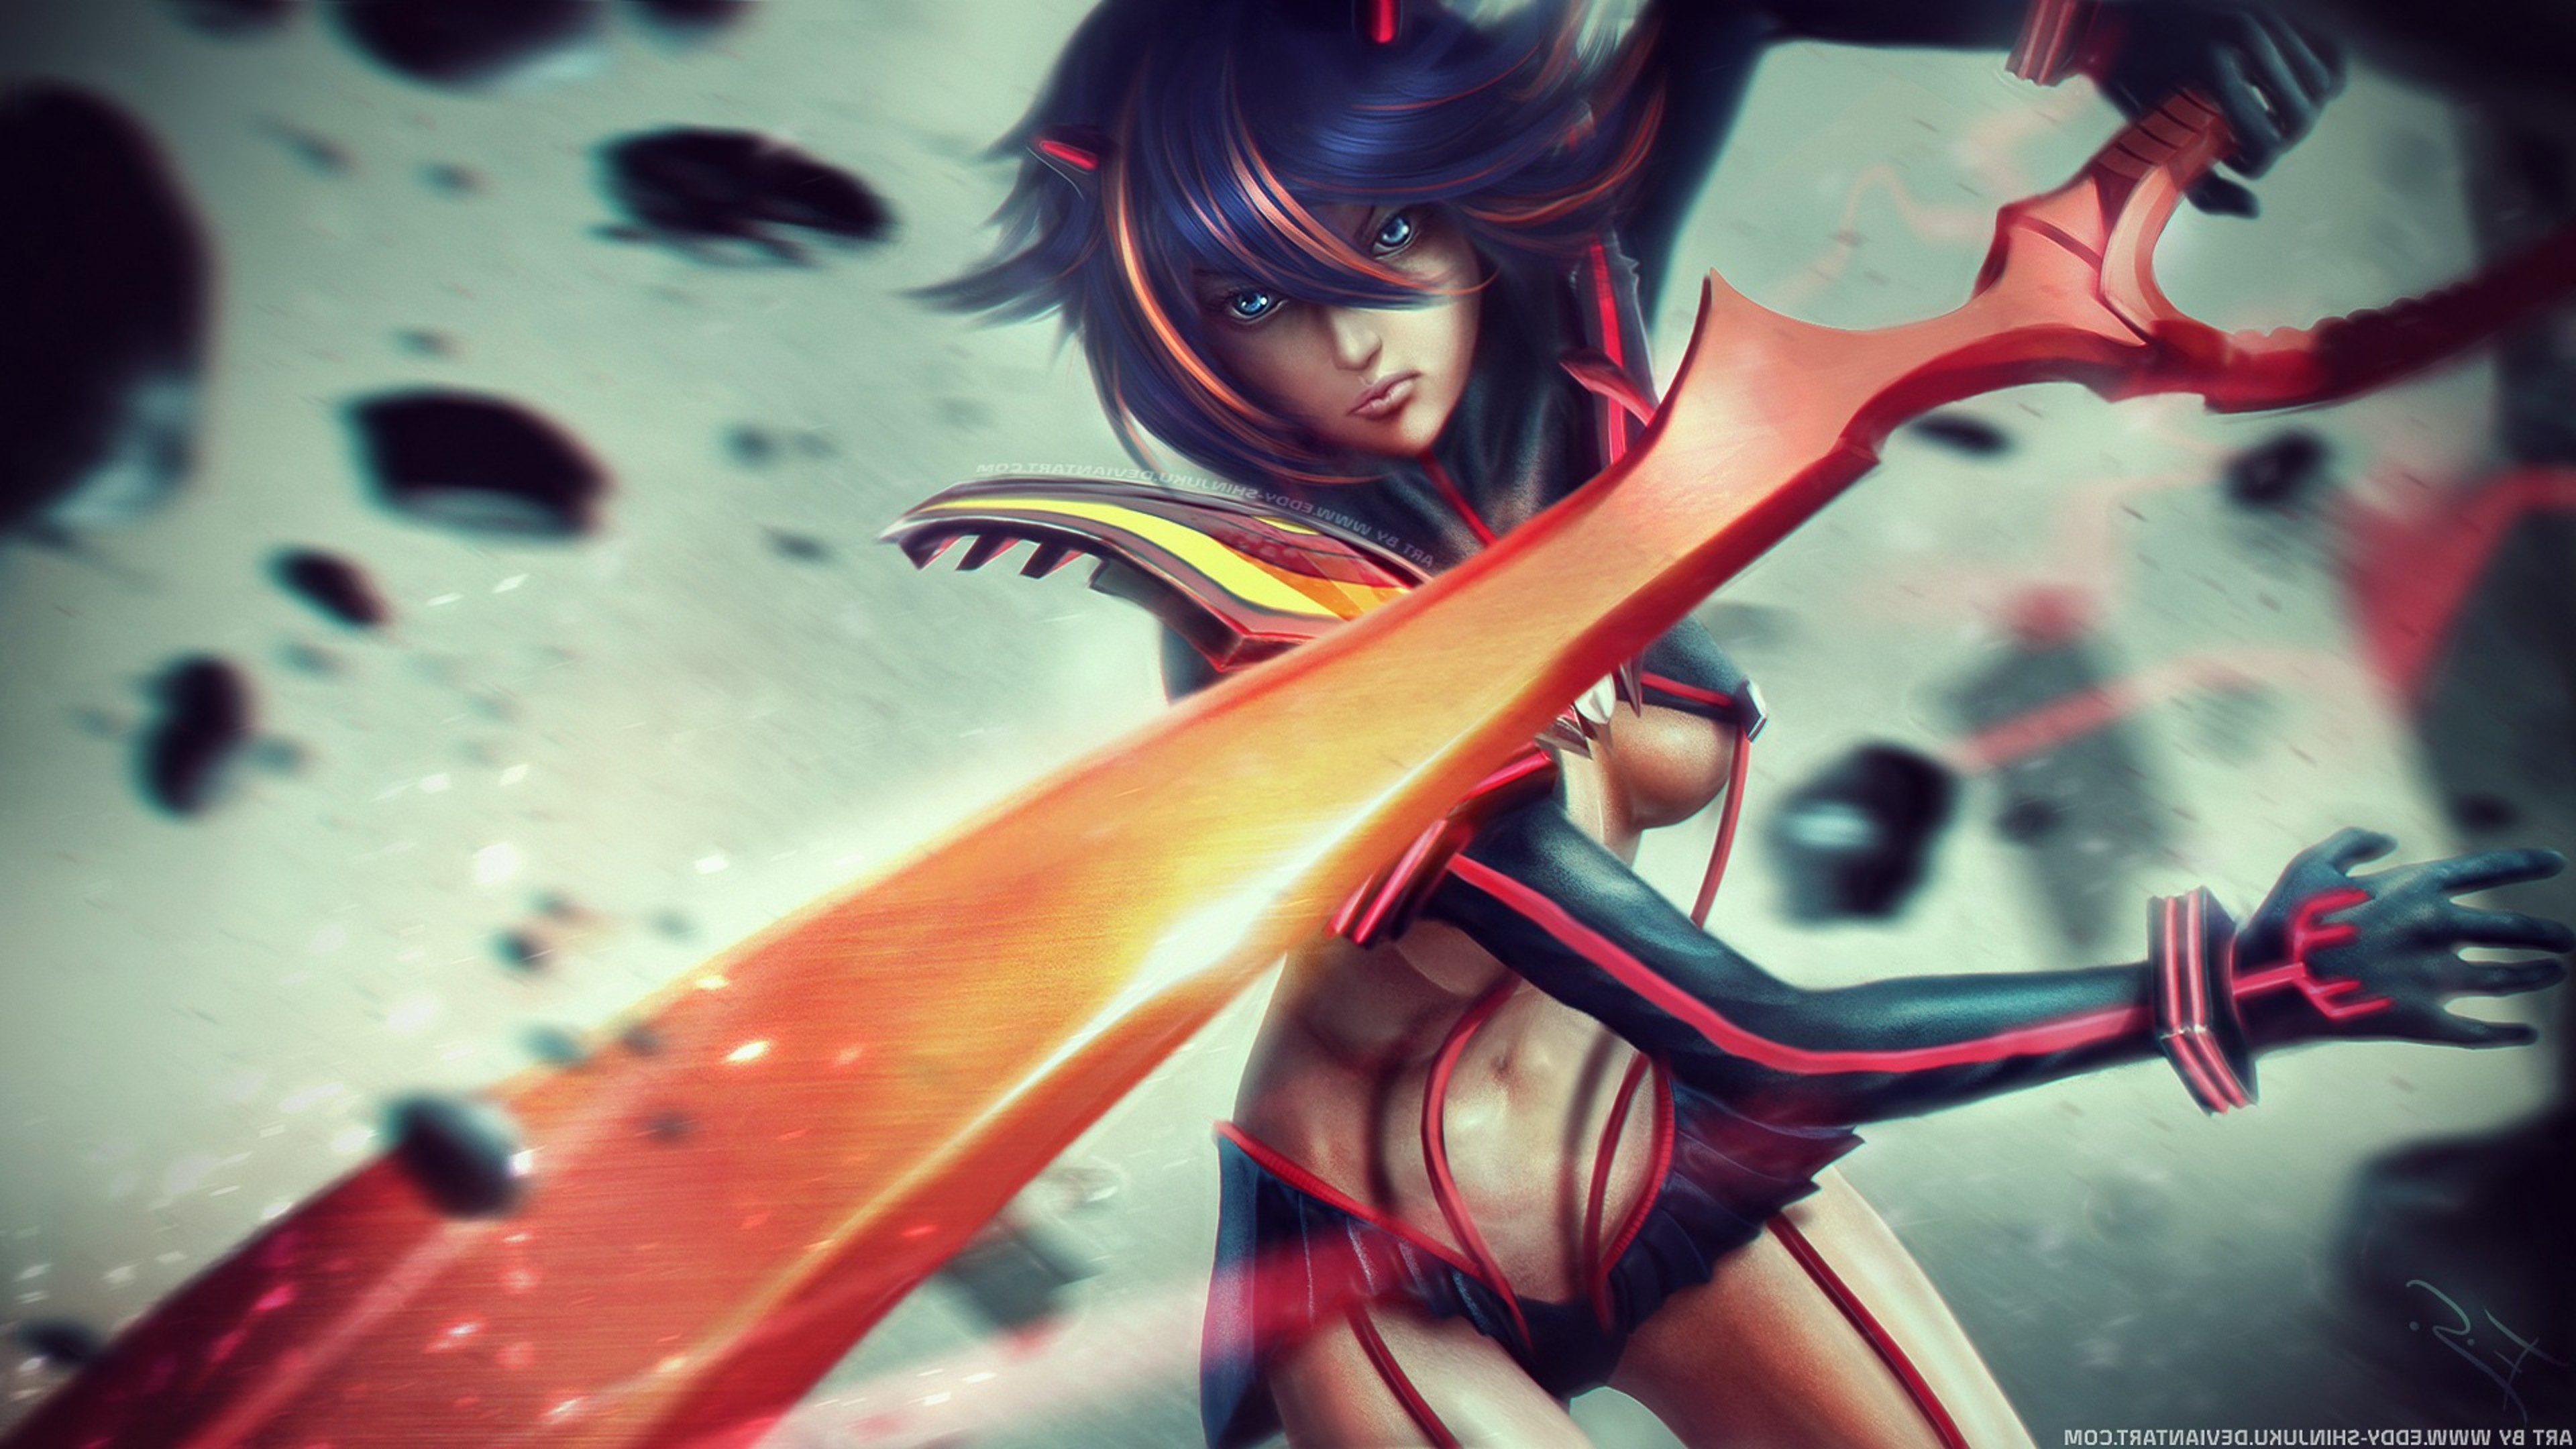 Ryuko kill la kill hd fantasy girls k wallpapers images backgrounds photos and pictures